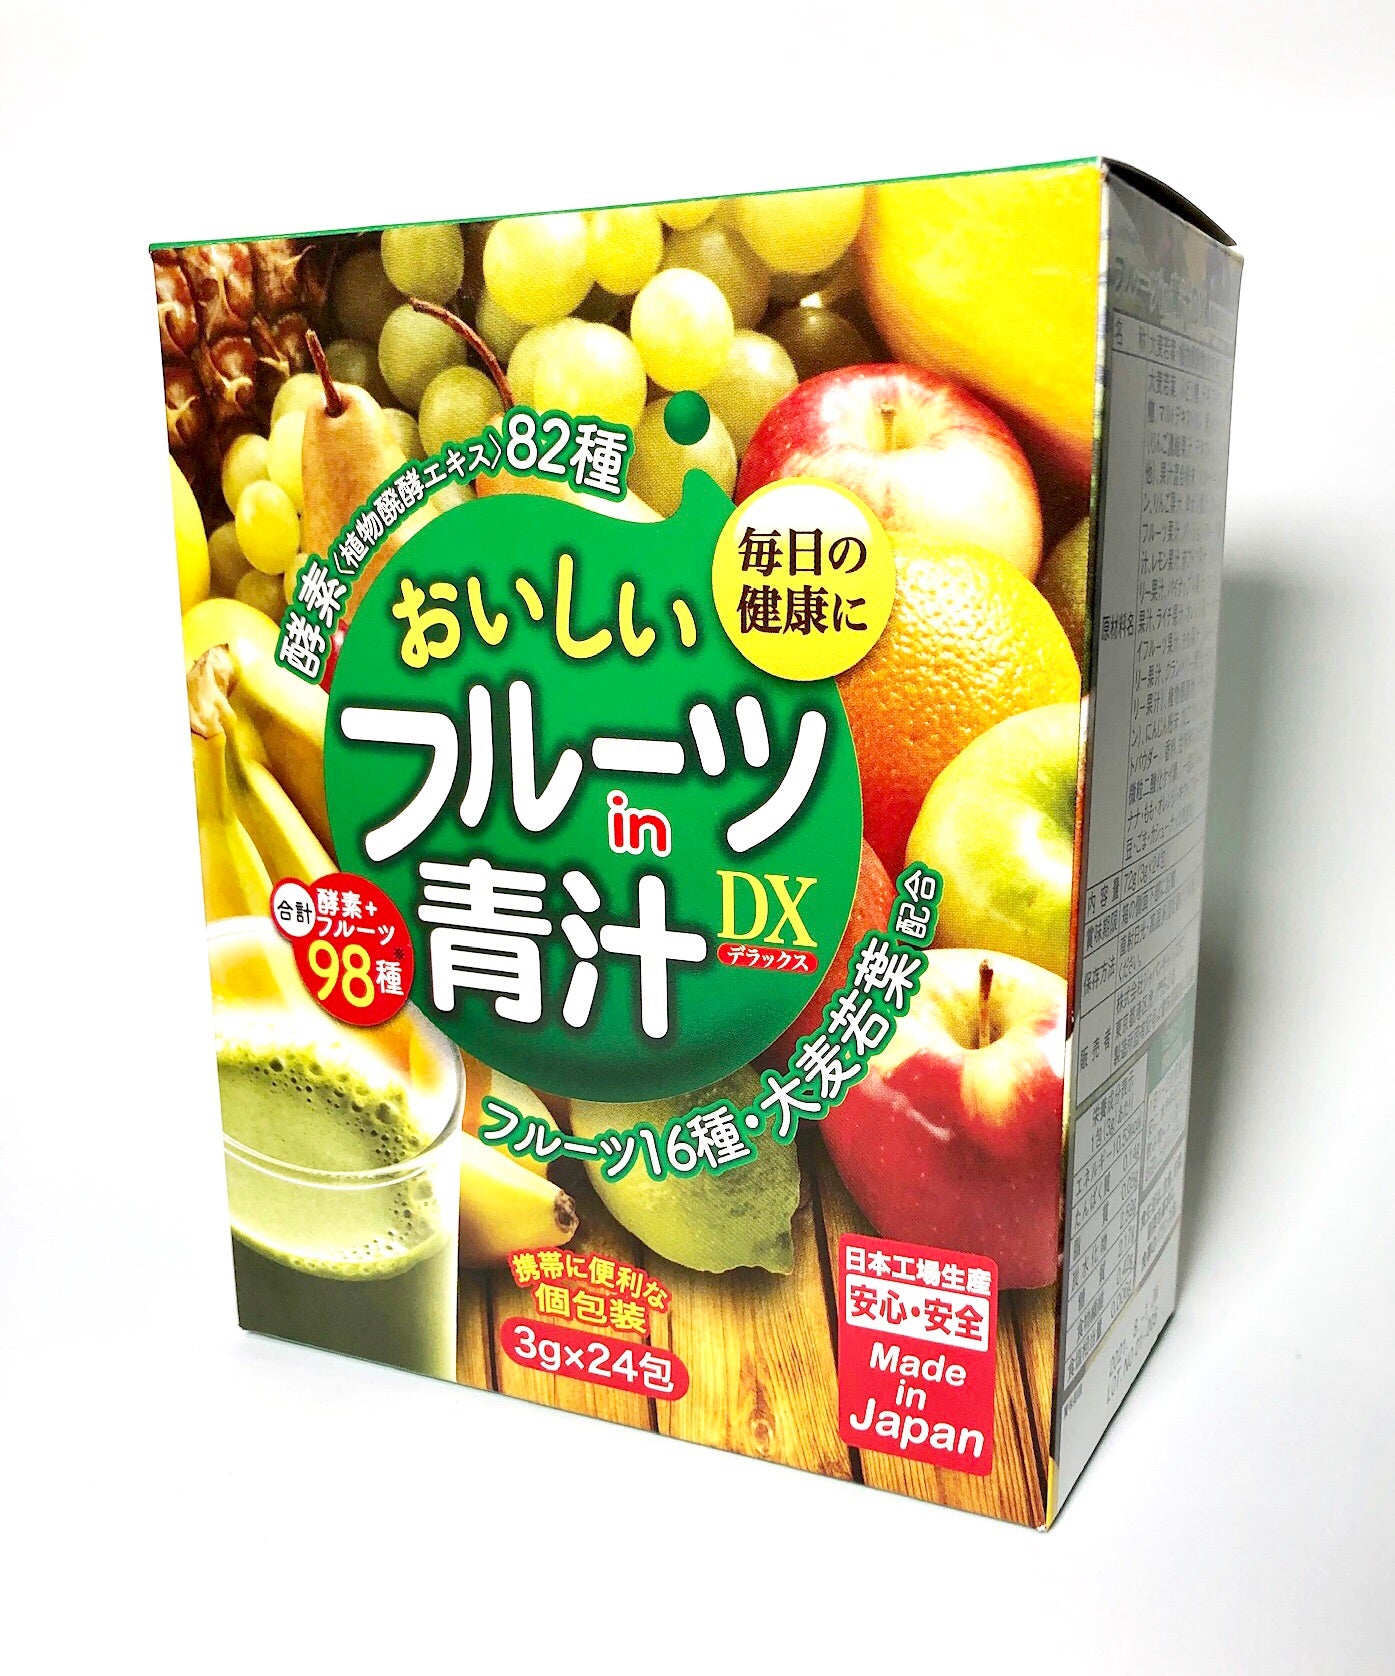 Aojiru Fruits DX - Azozire from barley shoots with the addition of fruit, 24 pcs.